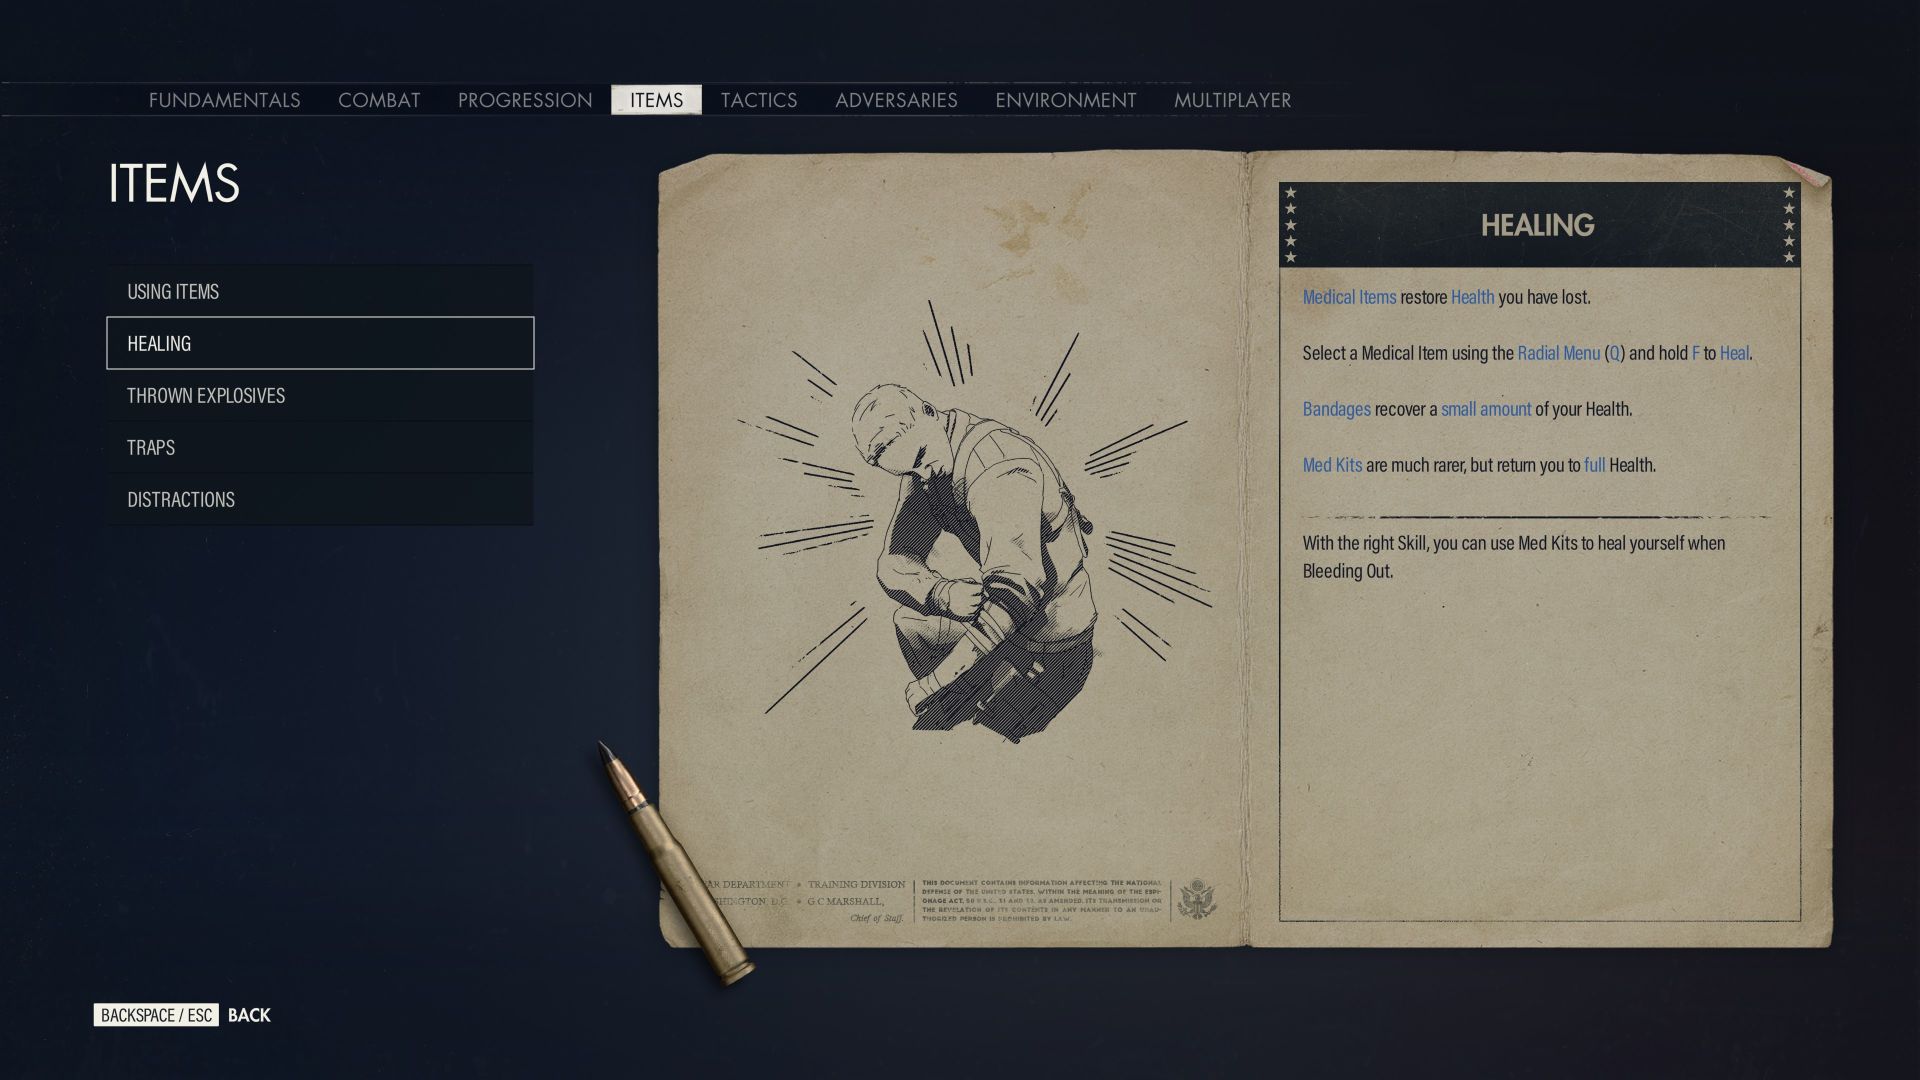 The Tutorials screen, showing Items - Healing. The screen features a booklet-style interface with sketches and text explaining how to heal.